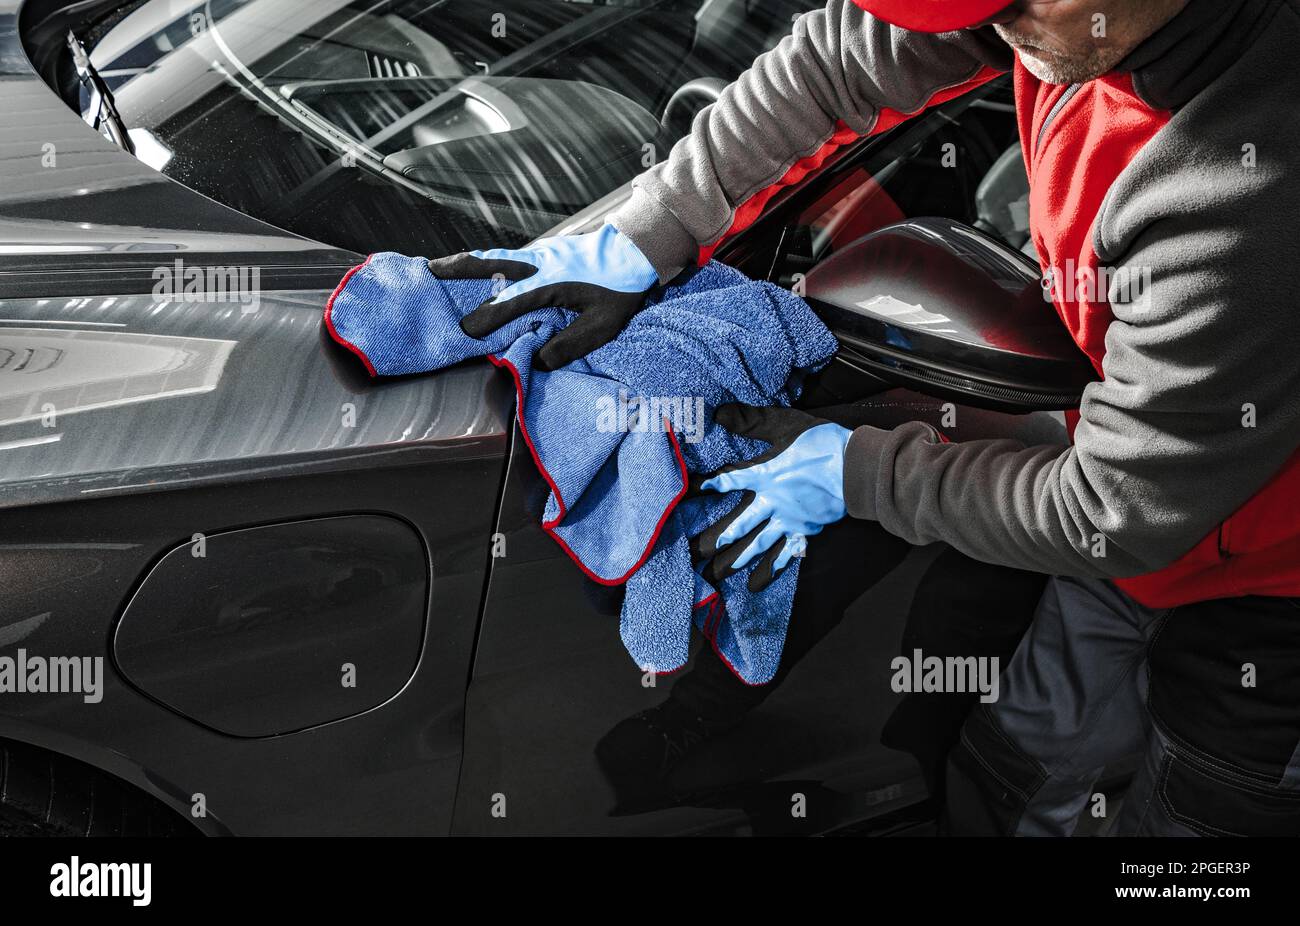 Professional Car Wash Worker Cleaning Vehicle Body Using Soft Cloth. Automotive Detailing Job. Stock Photo